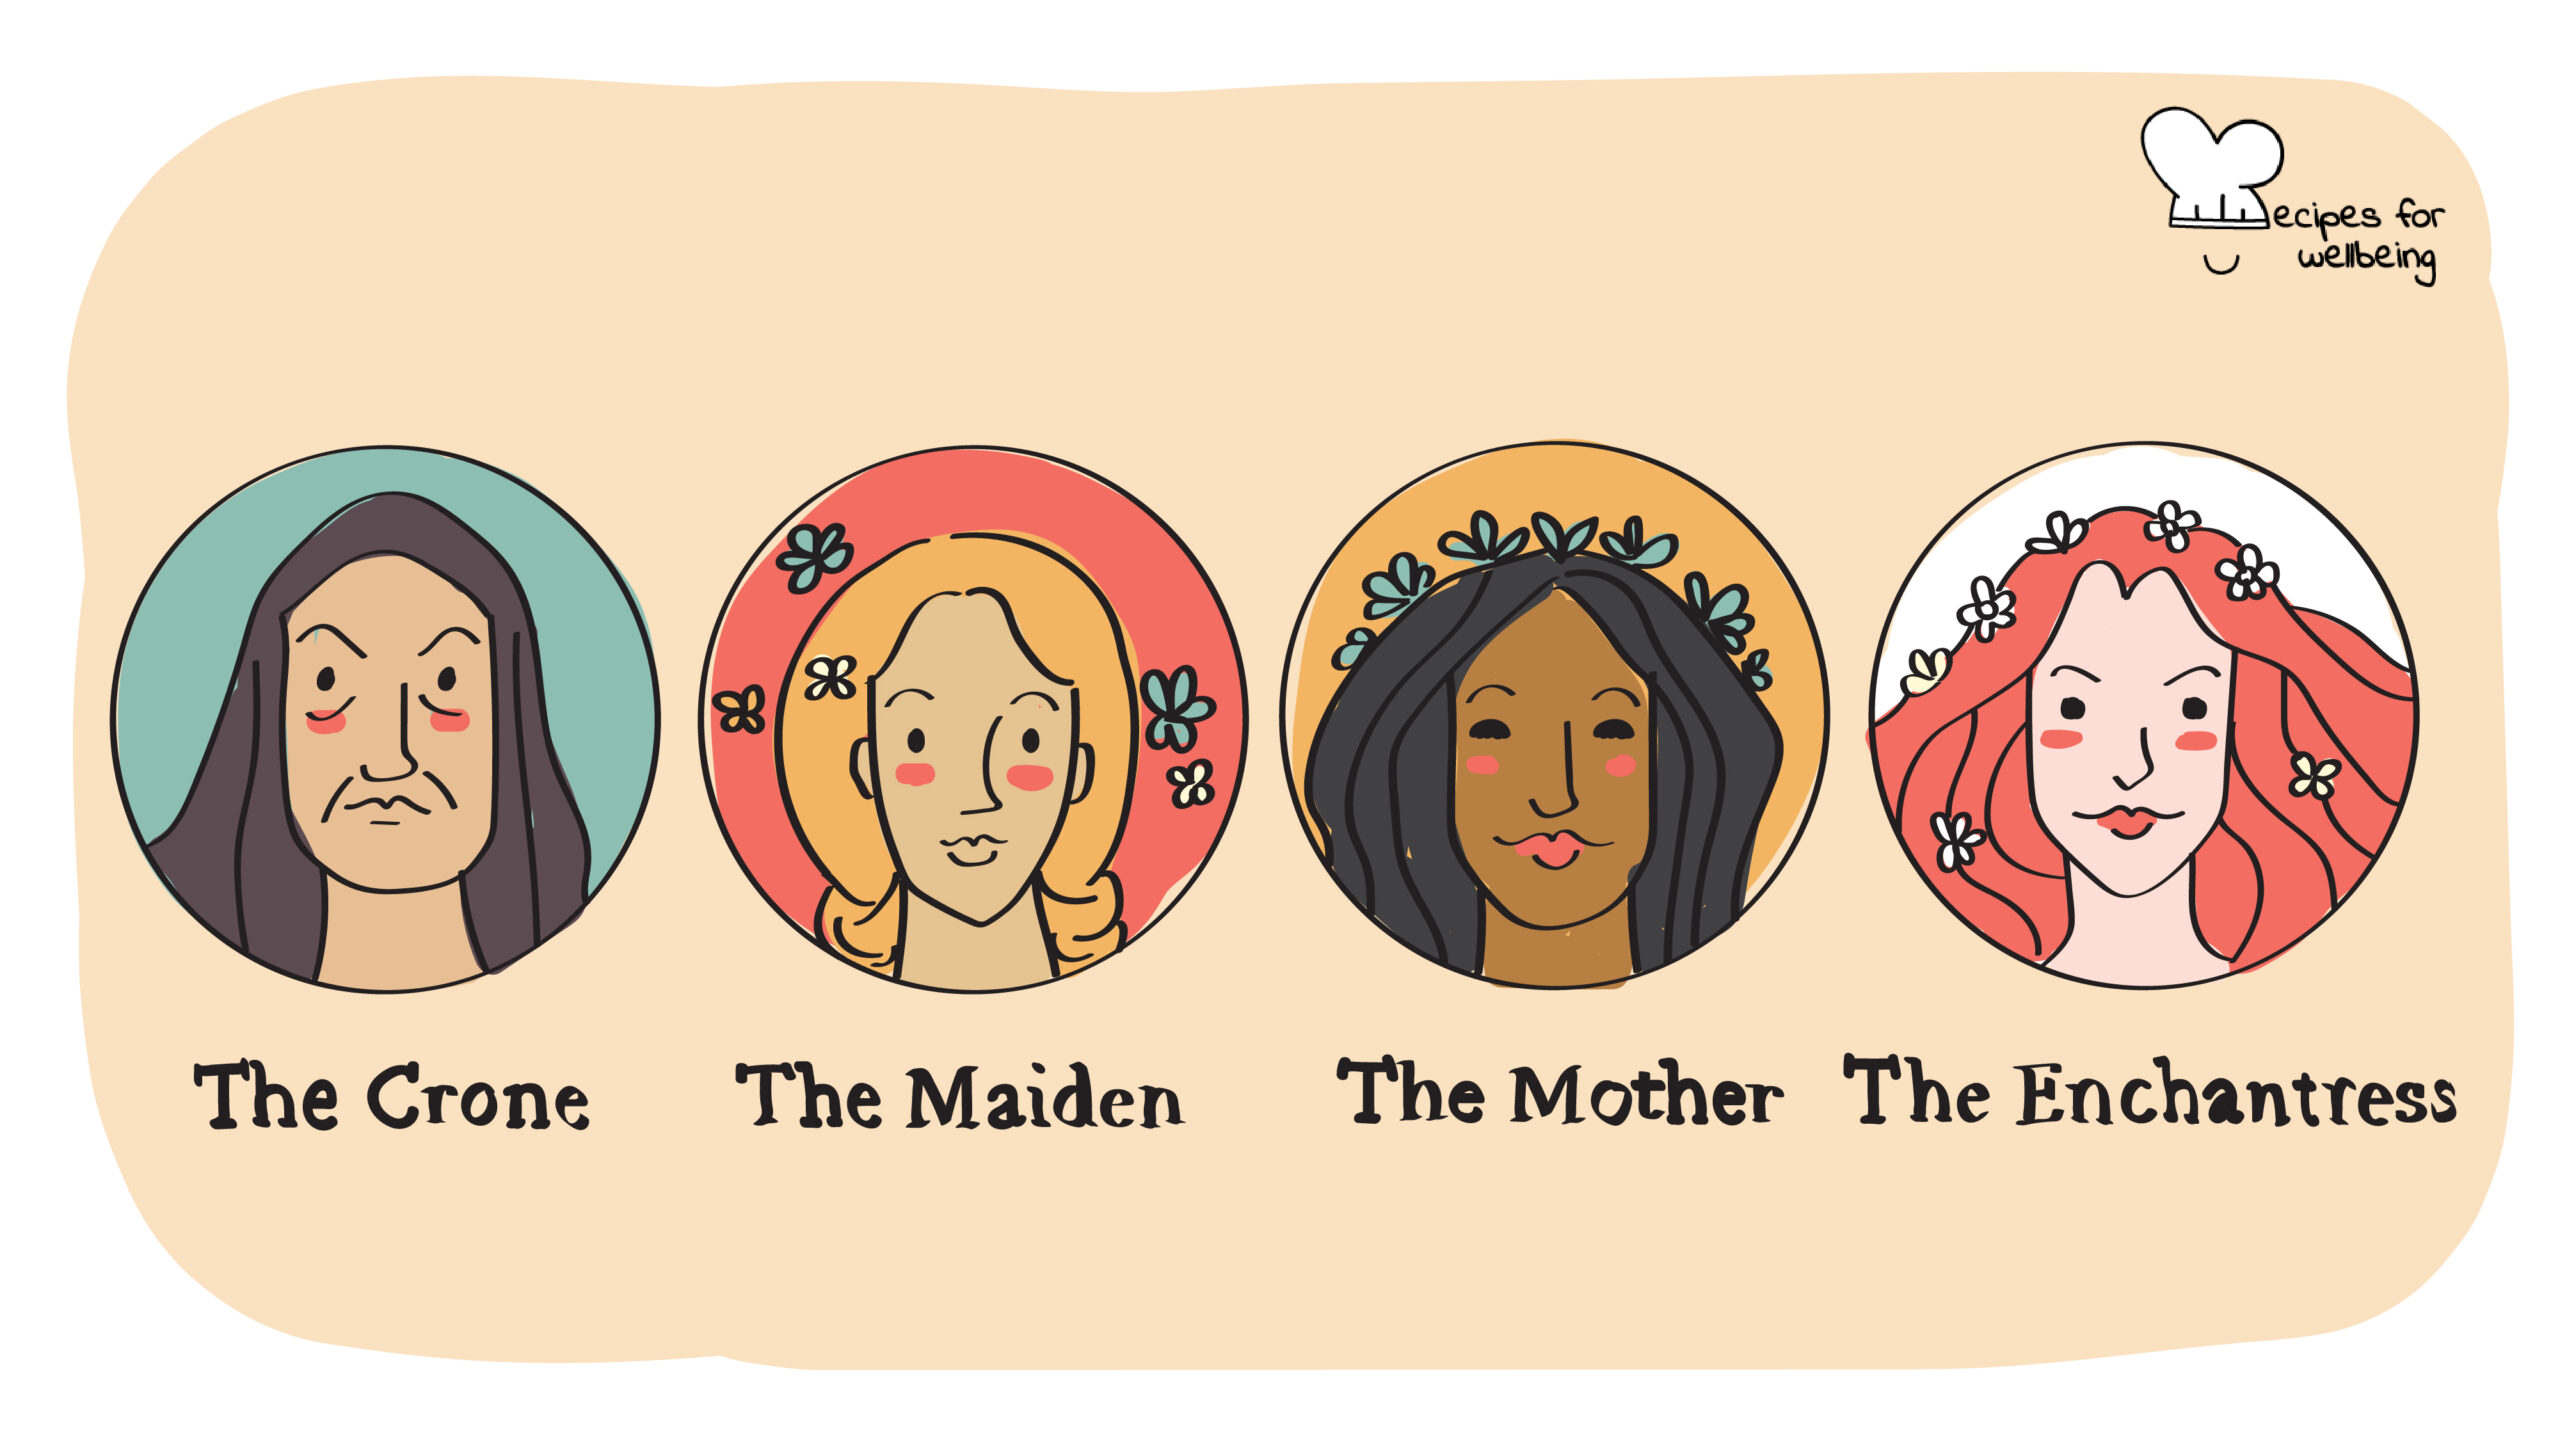 Illustration the four female archetypes: the crone, the maiden, the mother, and the enchantress. © Recipes for Wellbeing